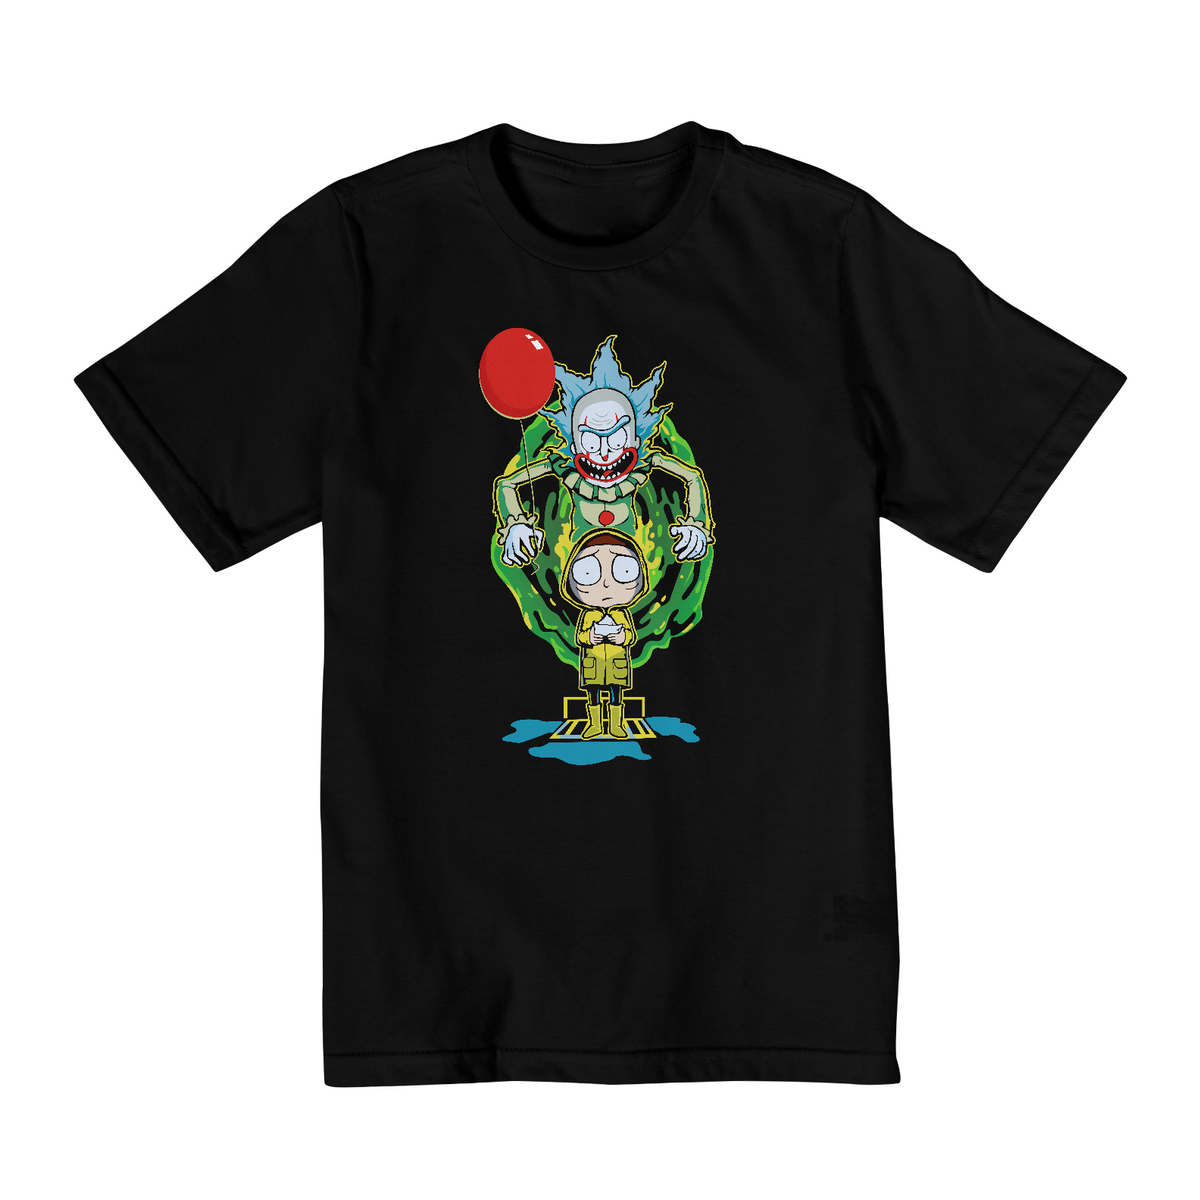 Nome do produto: Camiseta Infantil (10 a 14) Rick and Morty Pennywise